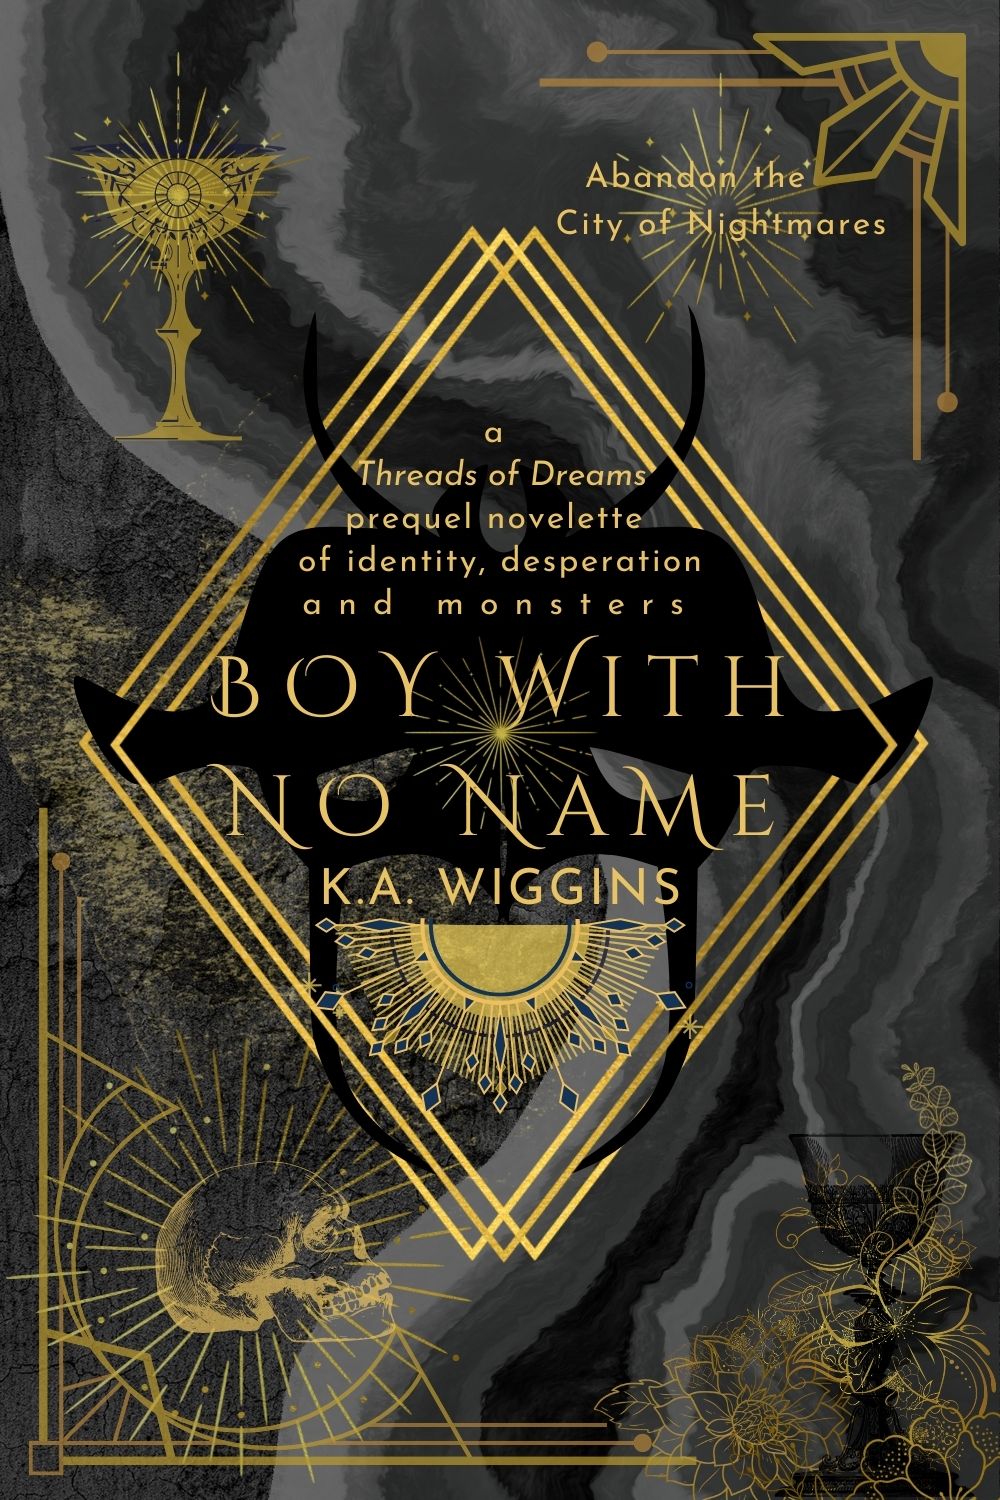 Side Story Novelette BOY WITH NO NAME ebook cover by K.A. Wiggins